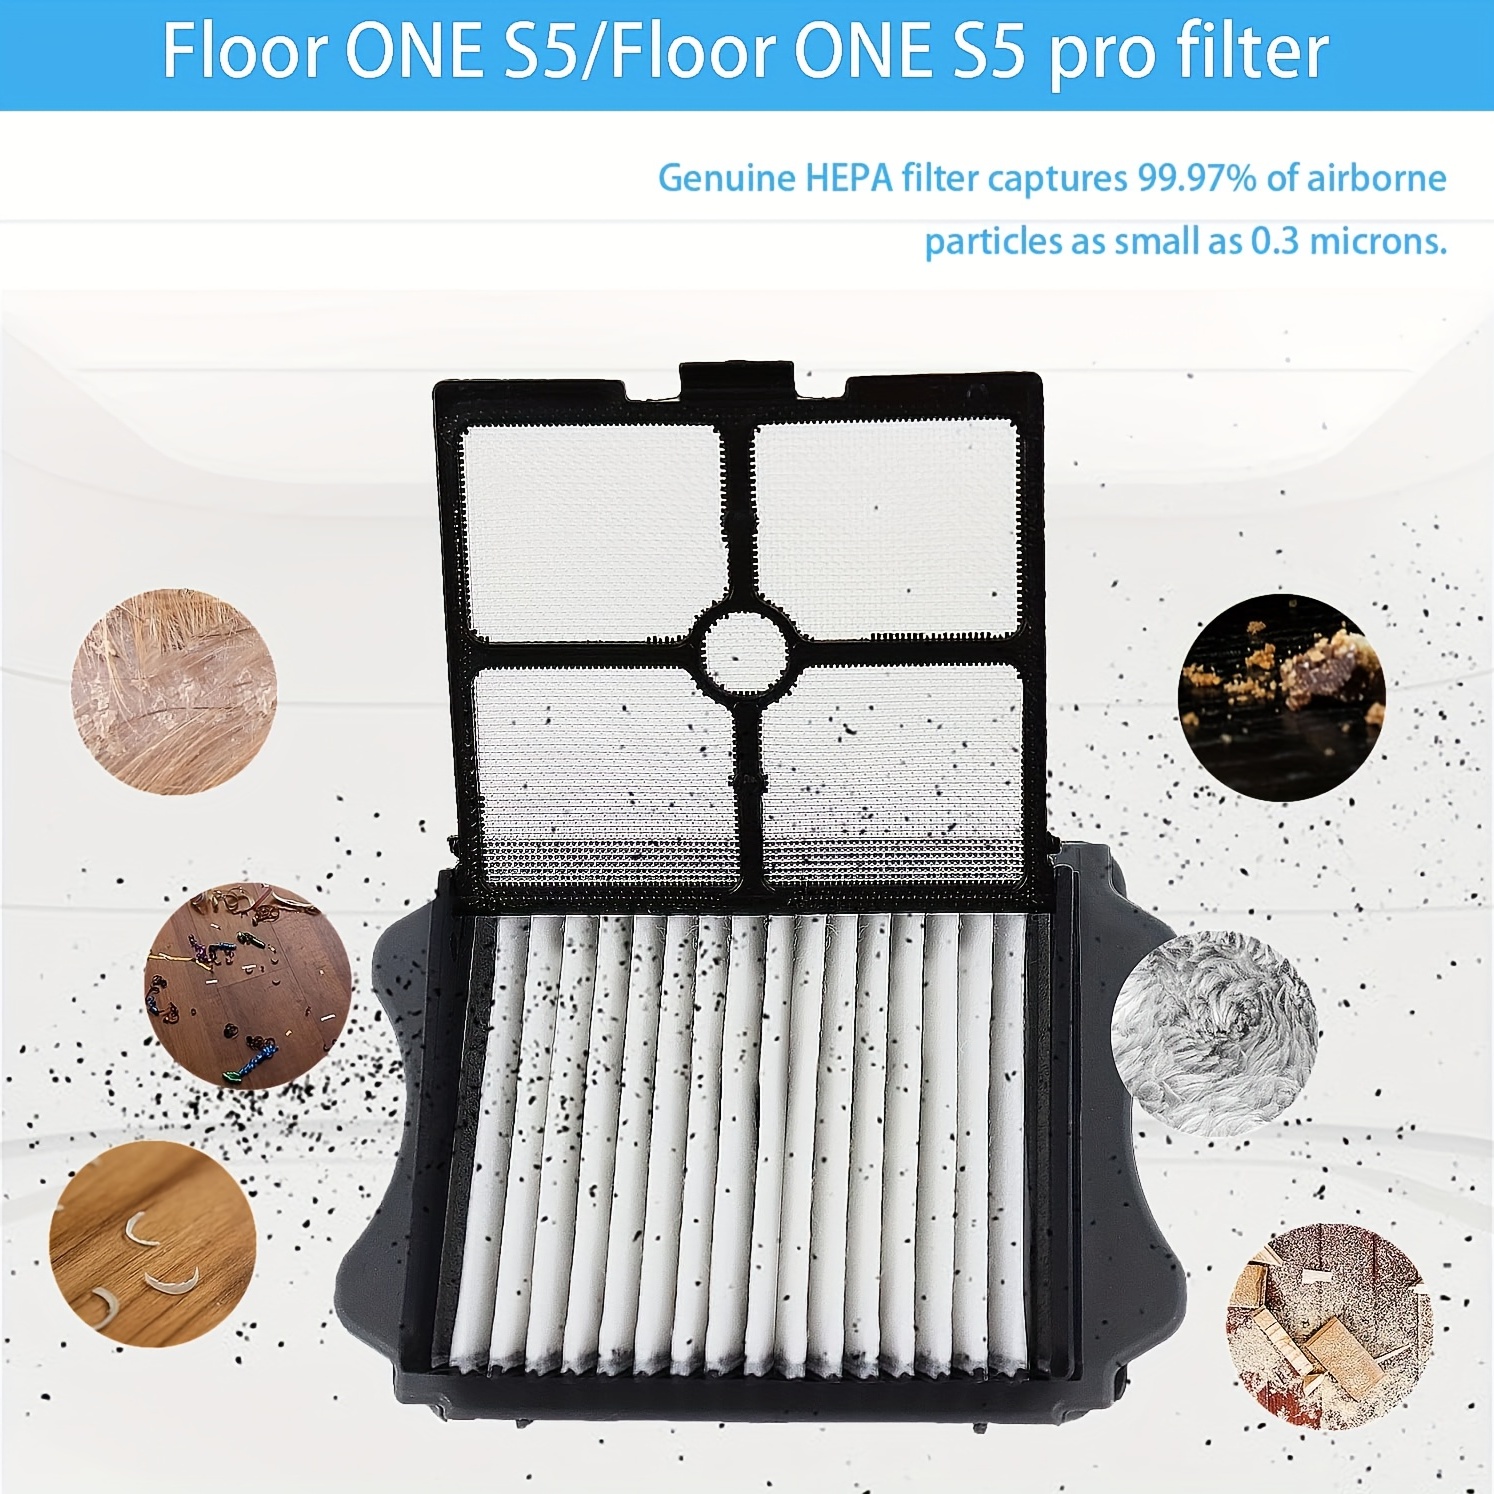 Tineco Floor One S5/s5 Pro Vacuum Cleaner Brush Roller And Filter 